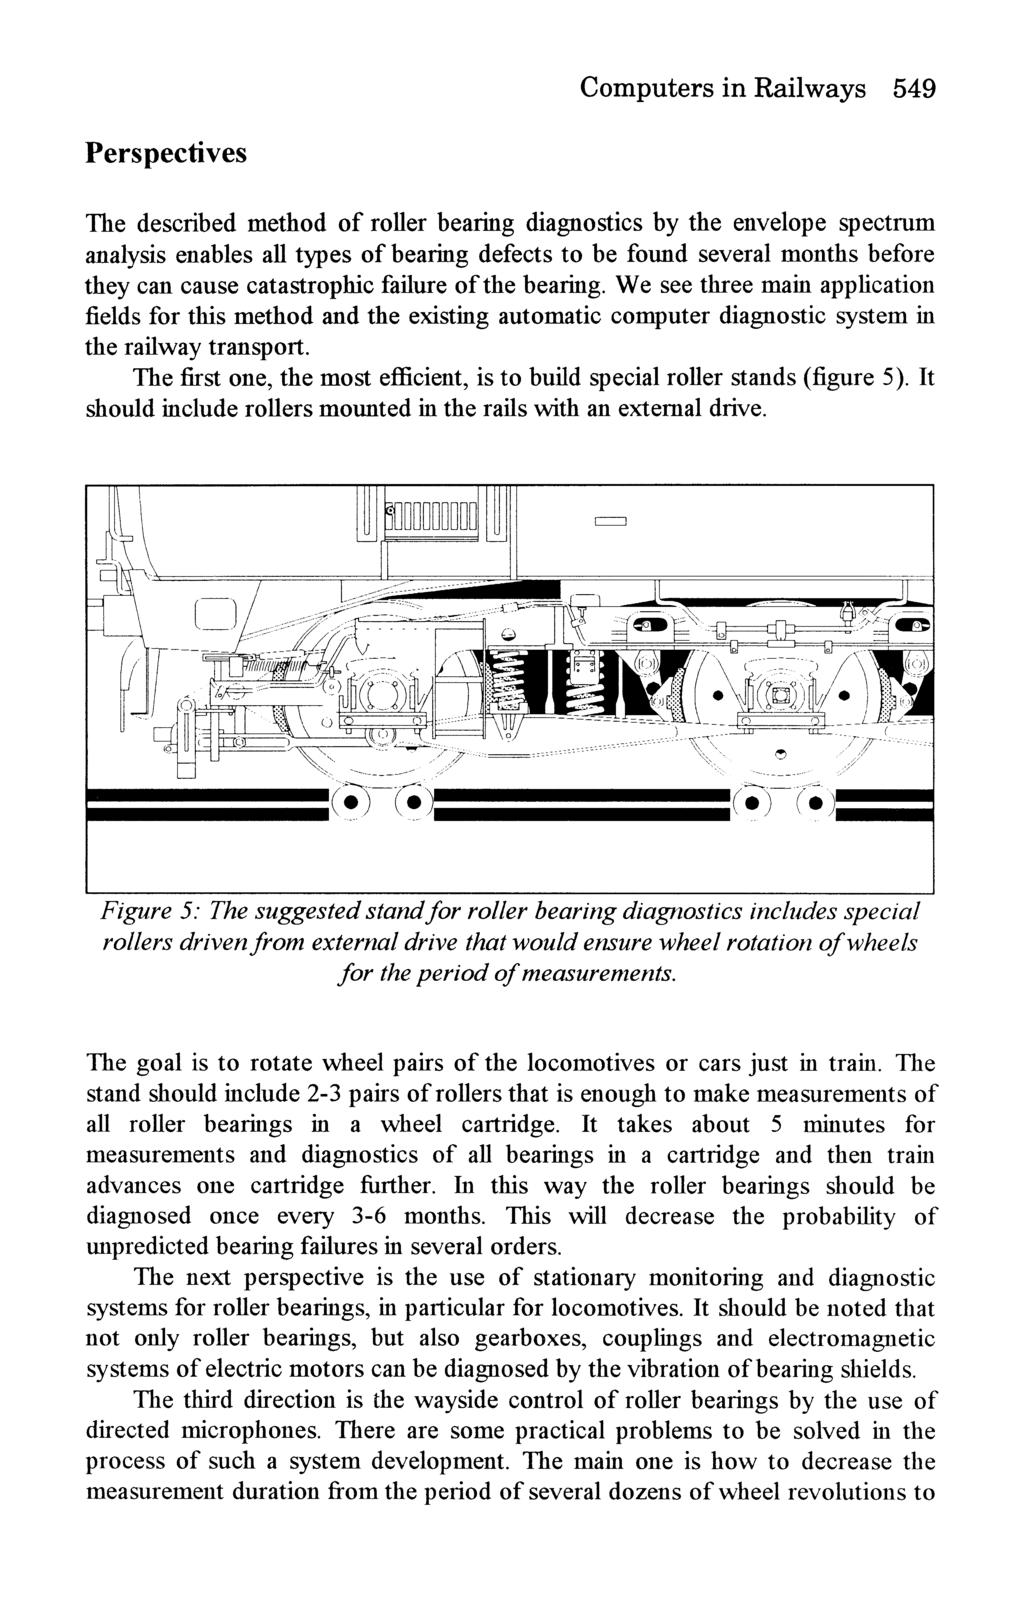 Perspectives Computers in Railways 549 The described method of roller bearing diagnostics by the envelope spectrum analysis enables all types of bearing defects to be found several months before they